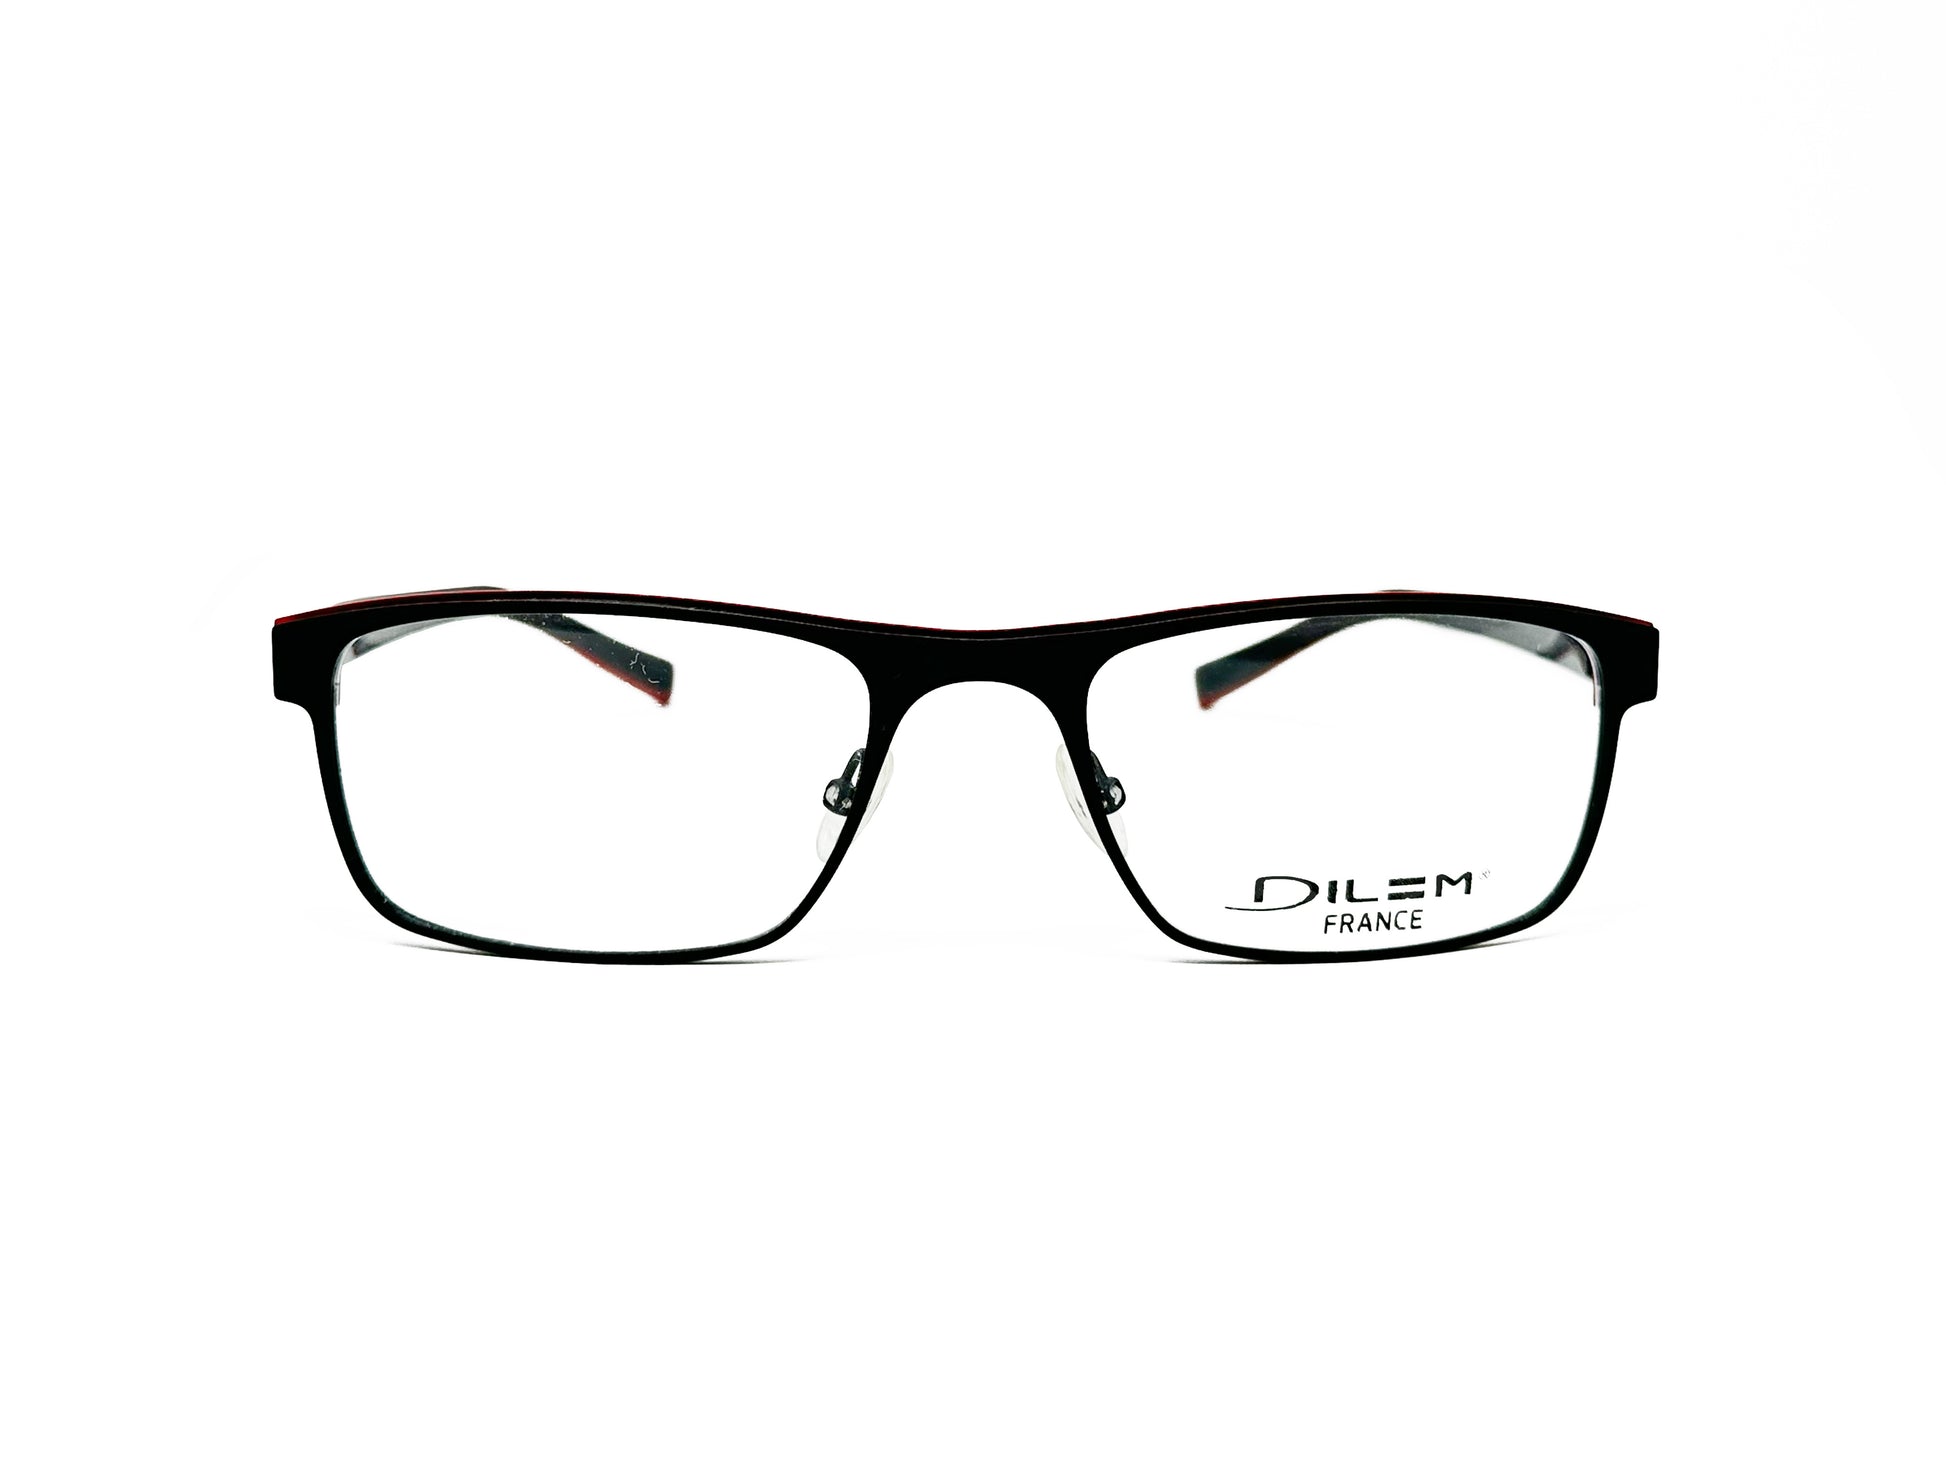 Dilem rectangular metal optical frame. Model: ZB195. Color: 2BB10 - Black with red accent. Front view. 